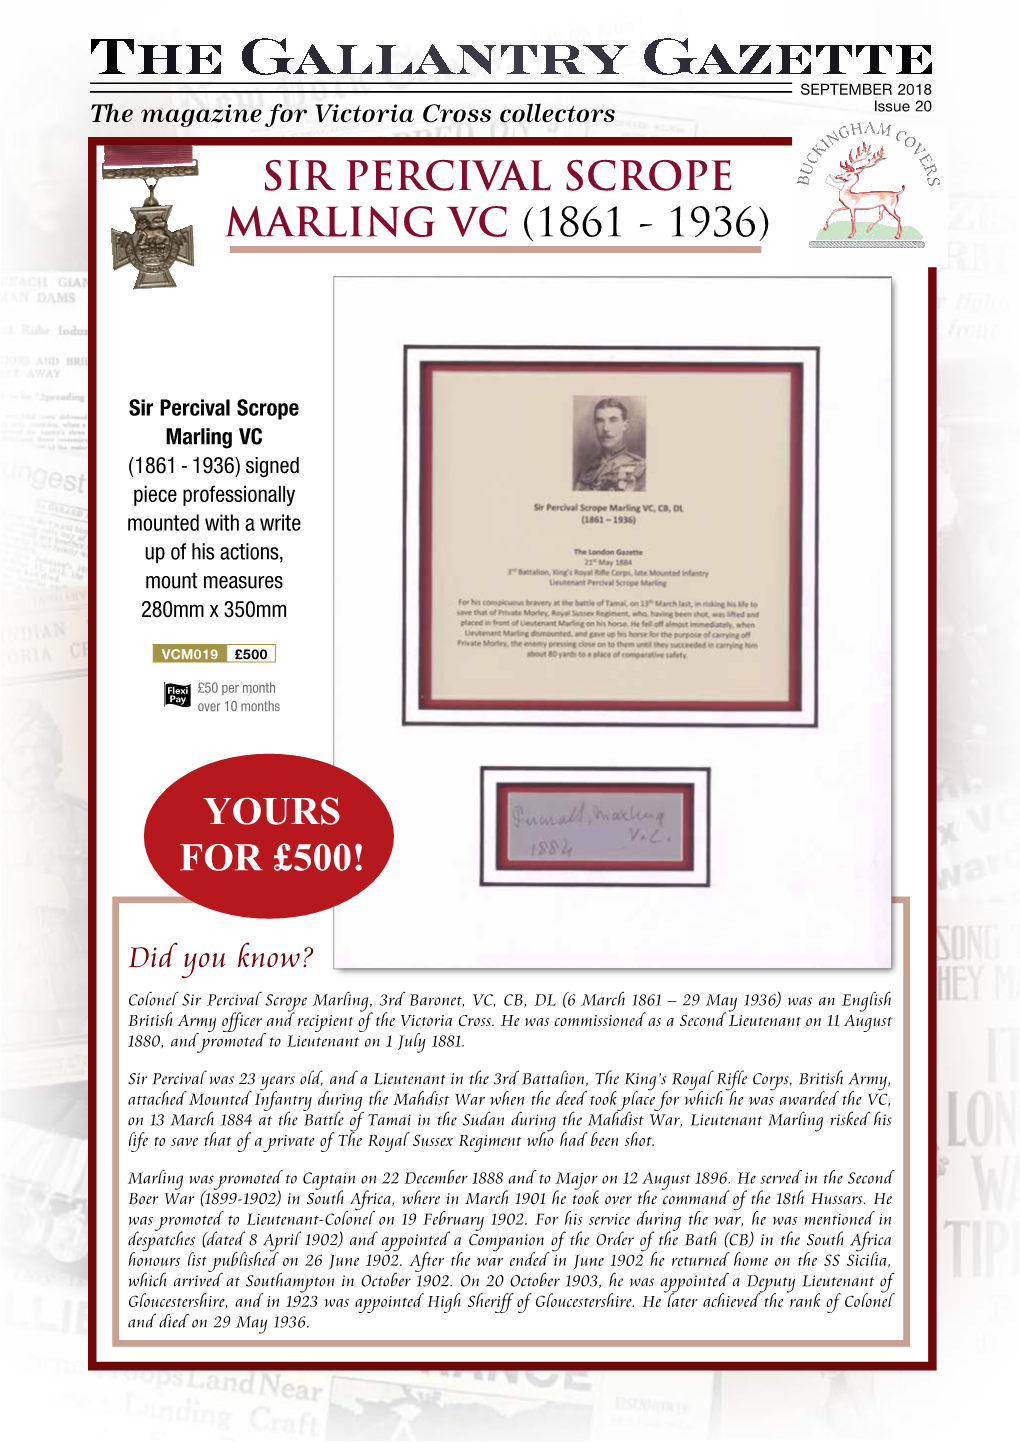 The Gallantry Gazette SEPTEMBER 2018 the Magazine for Victoria Cross Collectors Issue 20 SIR PERCIVAL SCROPE MARLING VC (1861 - 1936)